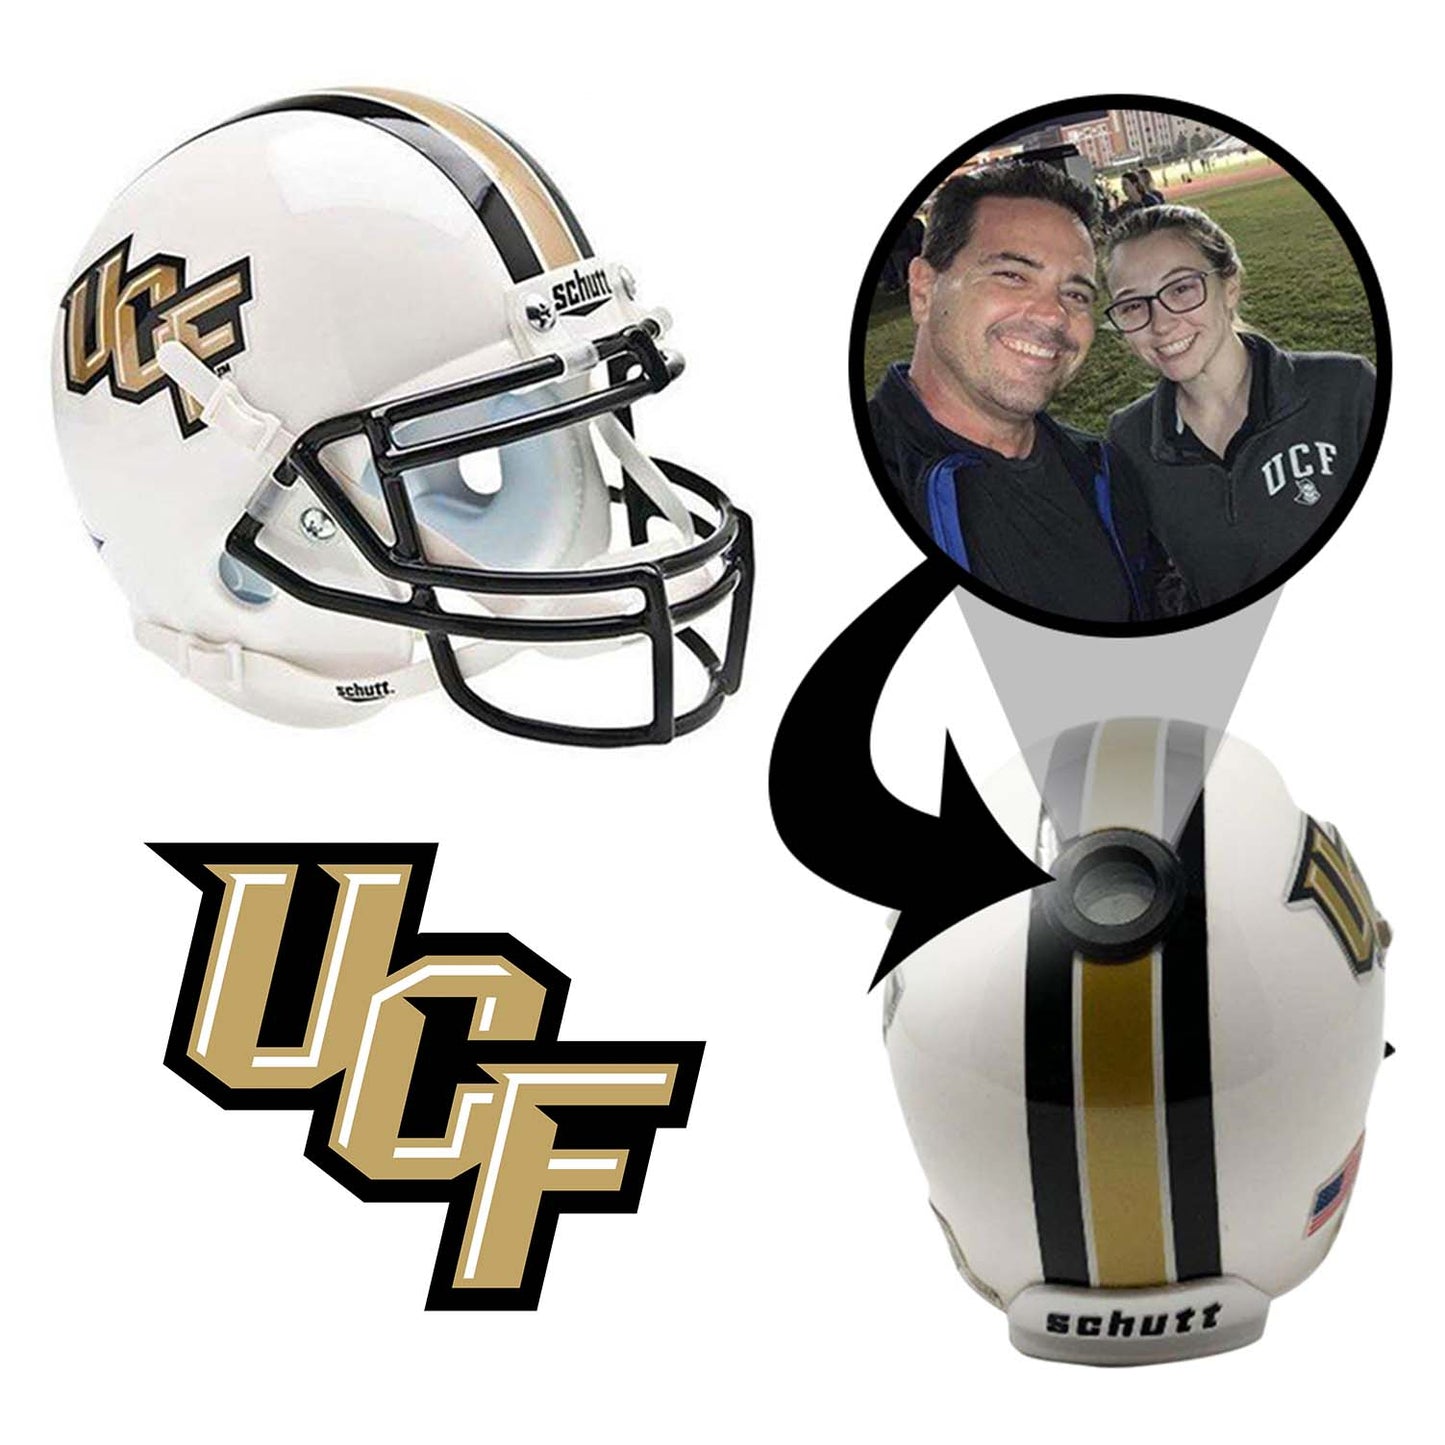 UCF Knights College Football Collectible Schutt Mini Helmet - Picture Inside - FANZ Collectibles